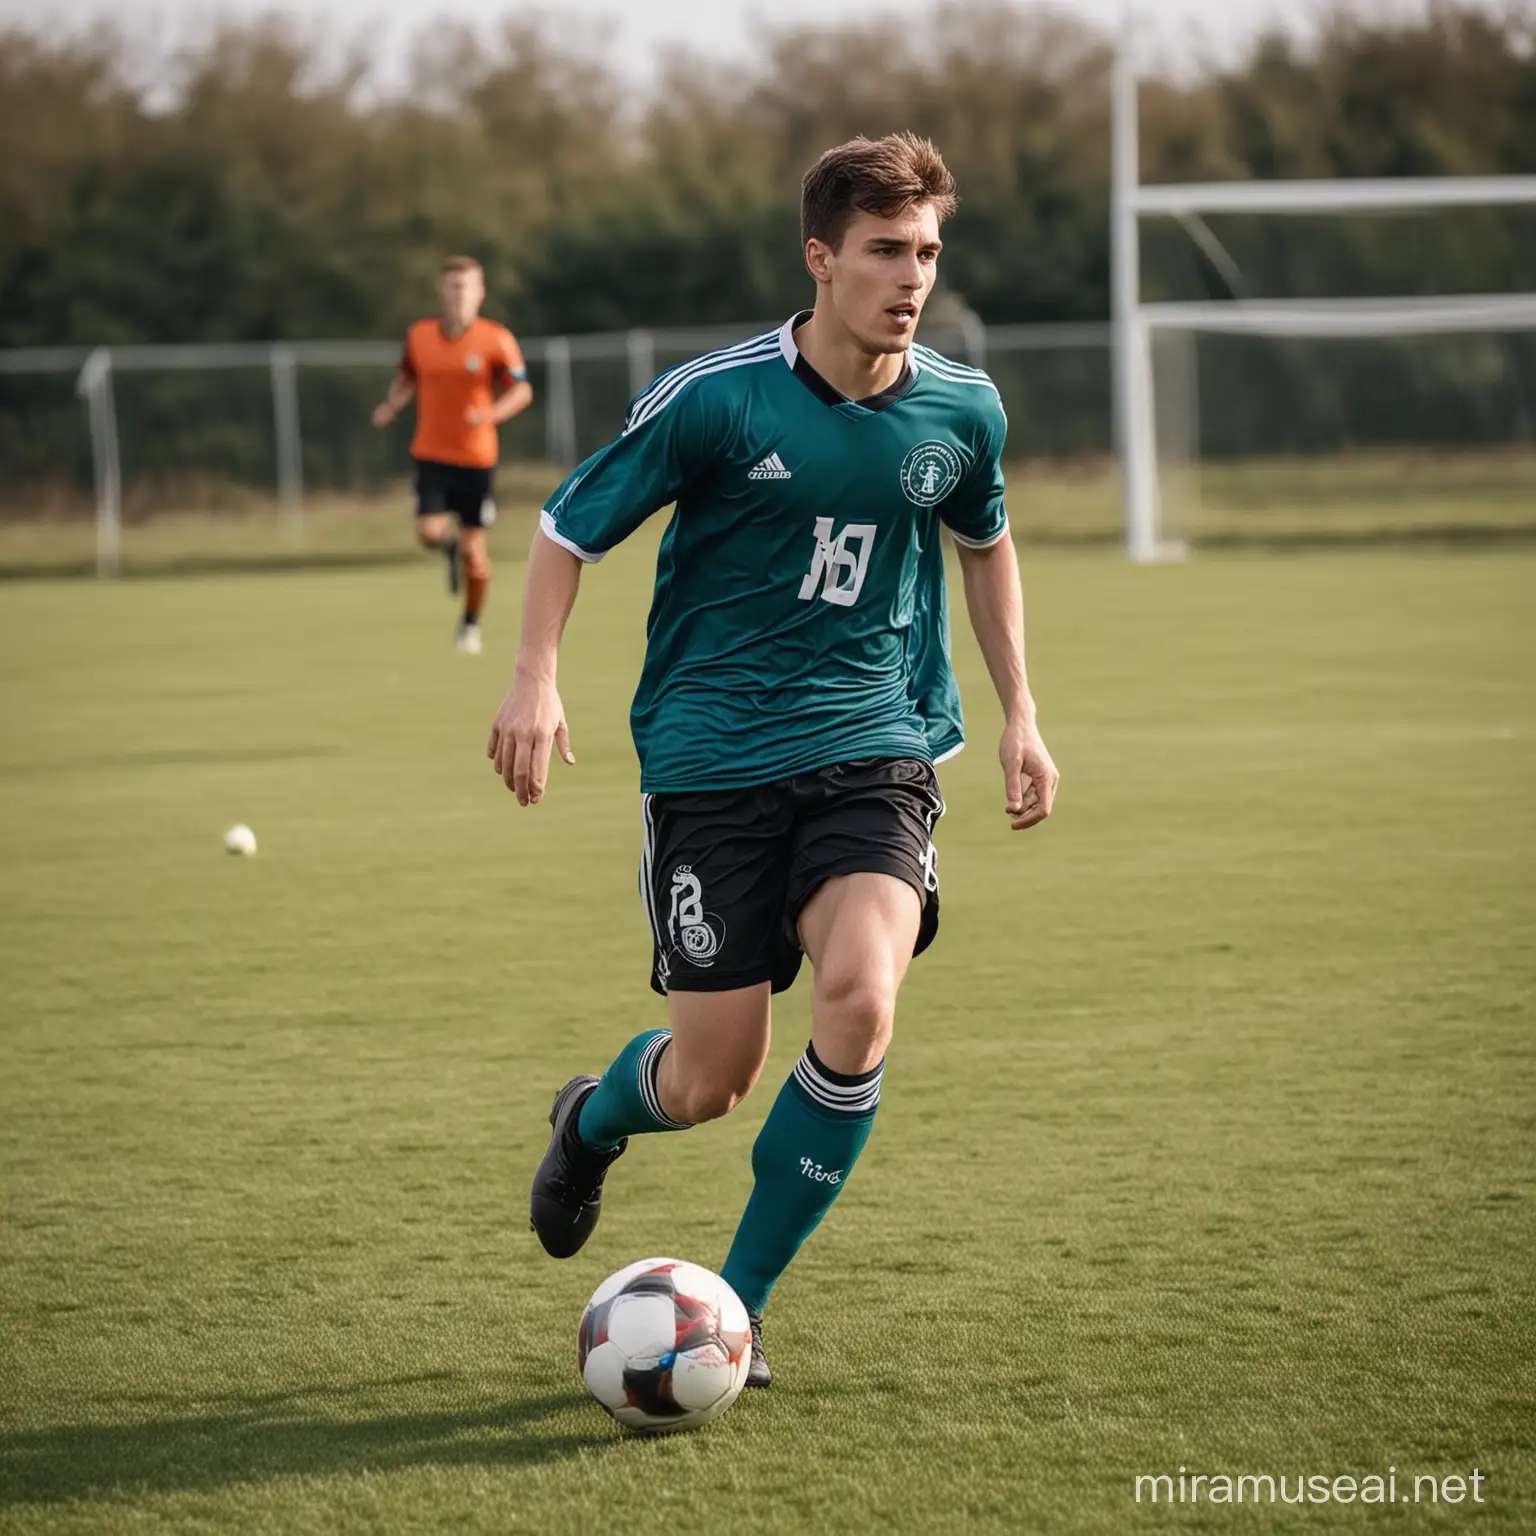 Dynamic Soccer Player in Action Playing Football Match